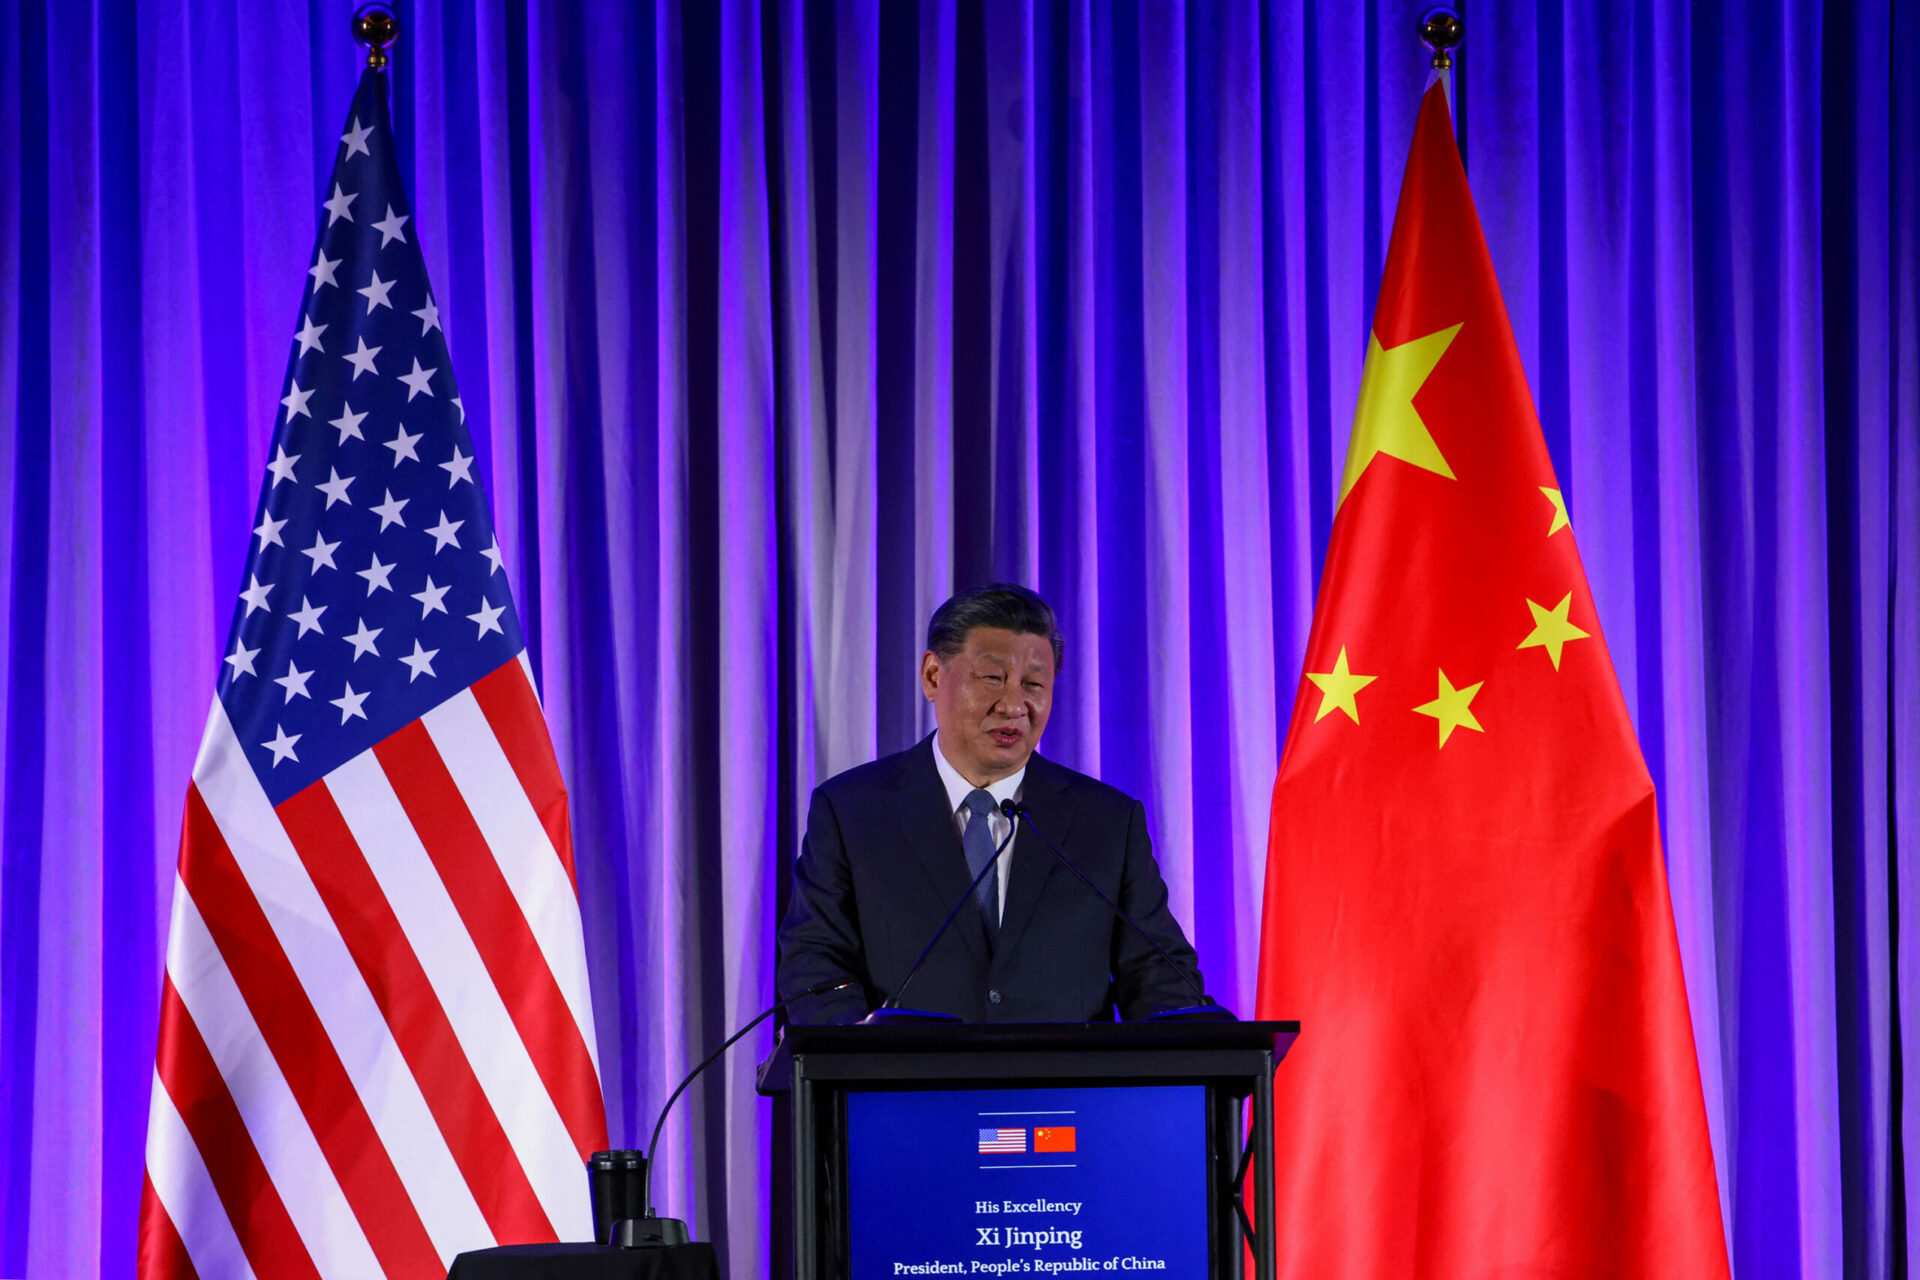 Xi says China seeks to be friends with US, won’t fight ‘hot war’